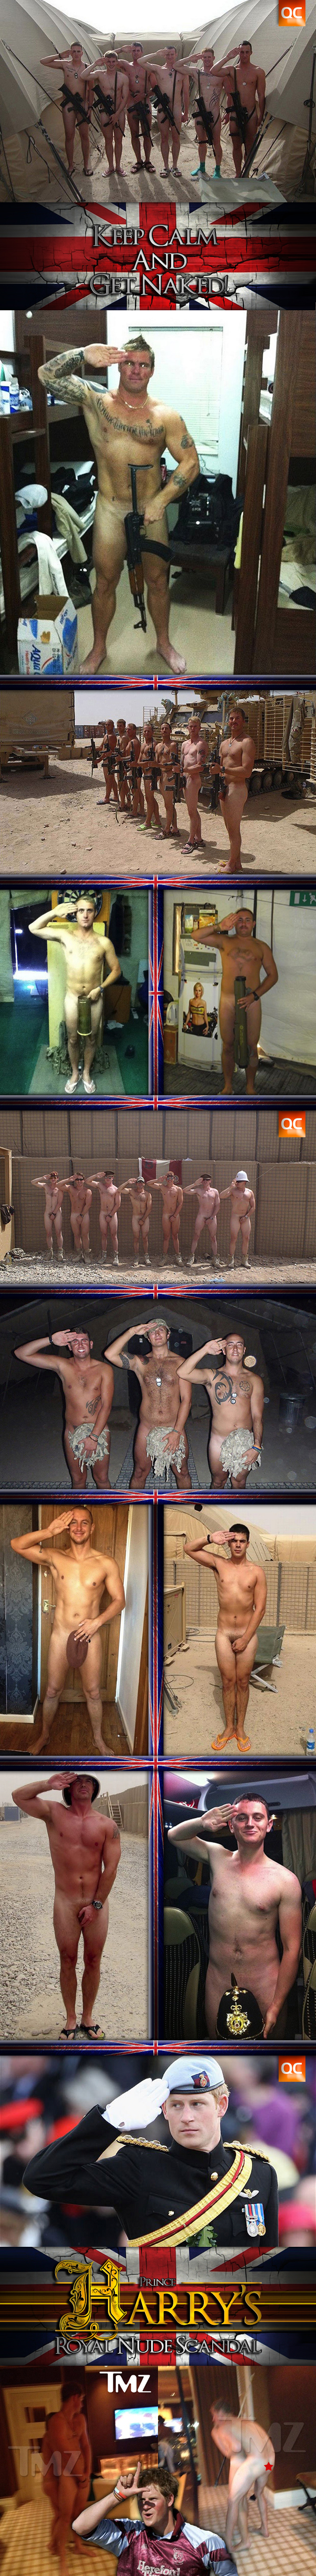 Soldiers Get Naked In Support Of Prince Harry!